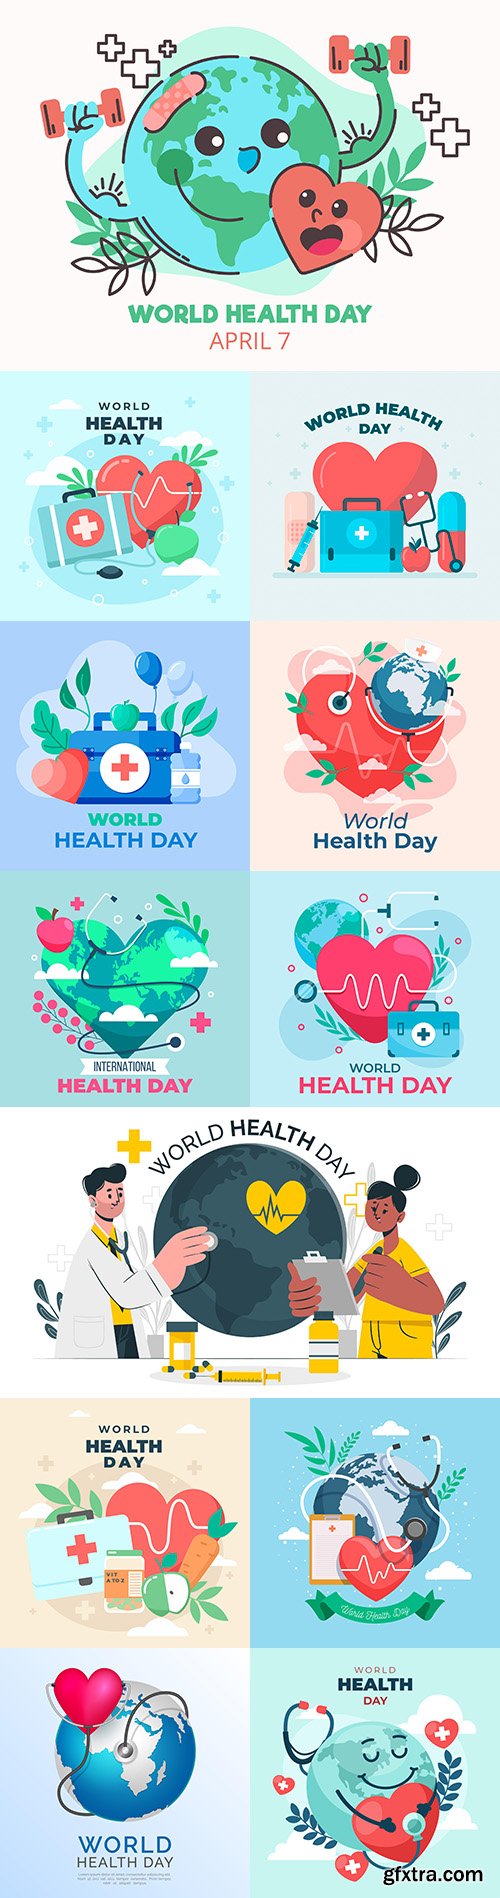 World health day with planet and heart illustration flat design